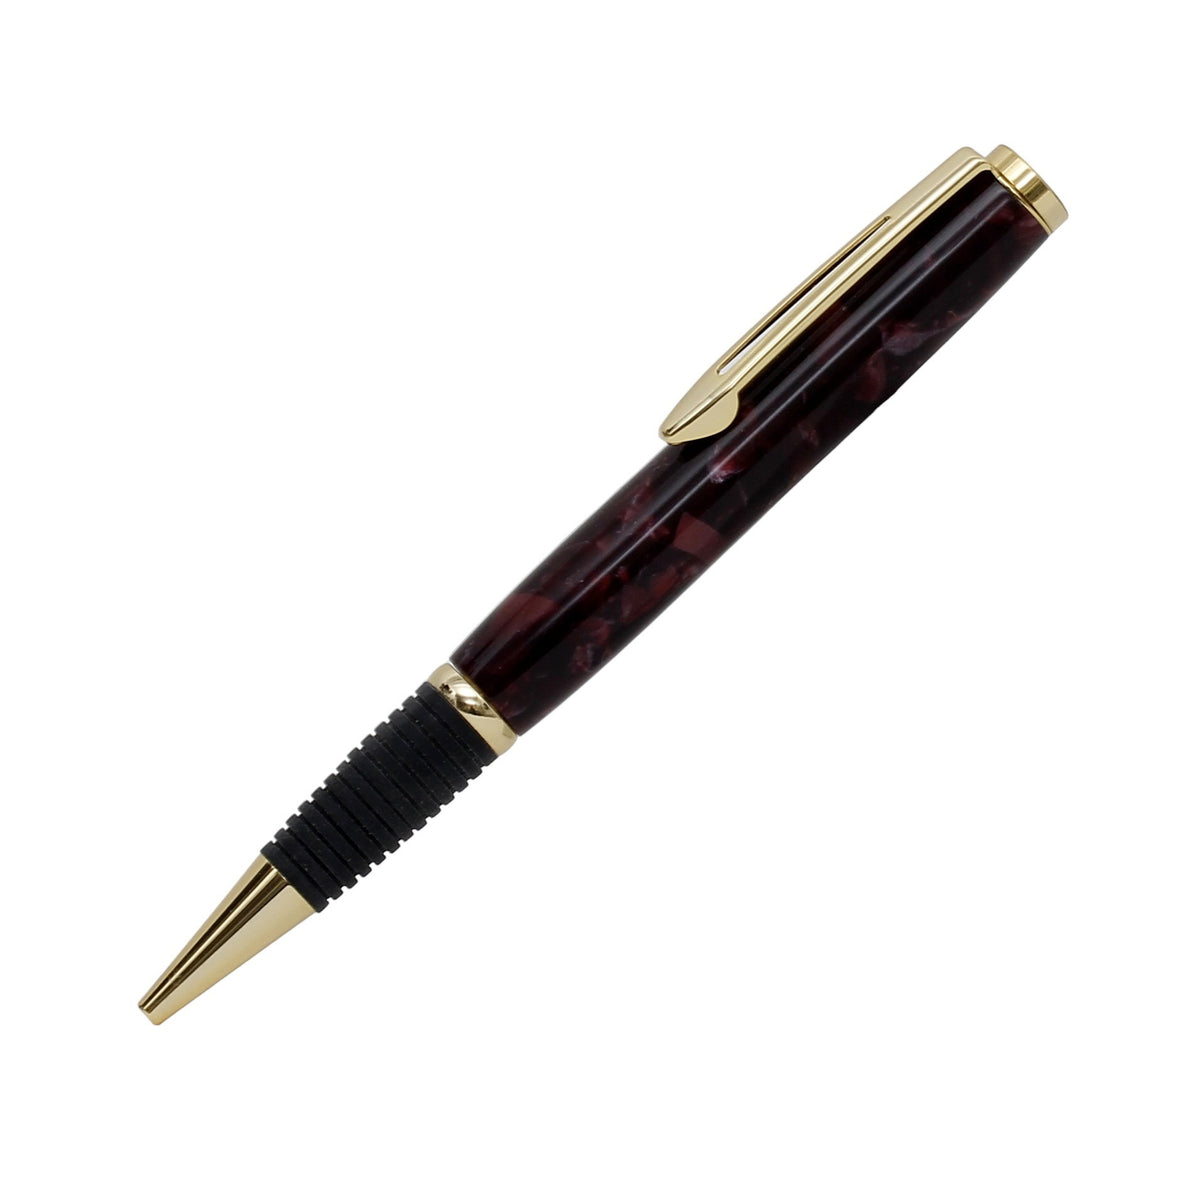 ART-PEN: Handcrafted Luxury Twist Rollerball Pen - GOLD with BROWN ACQUAPEARL acrylic hand turned body - Artistica.com